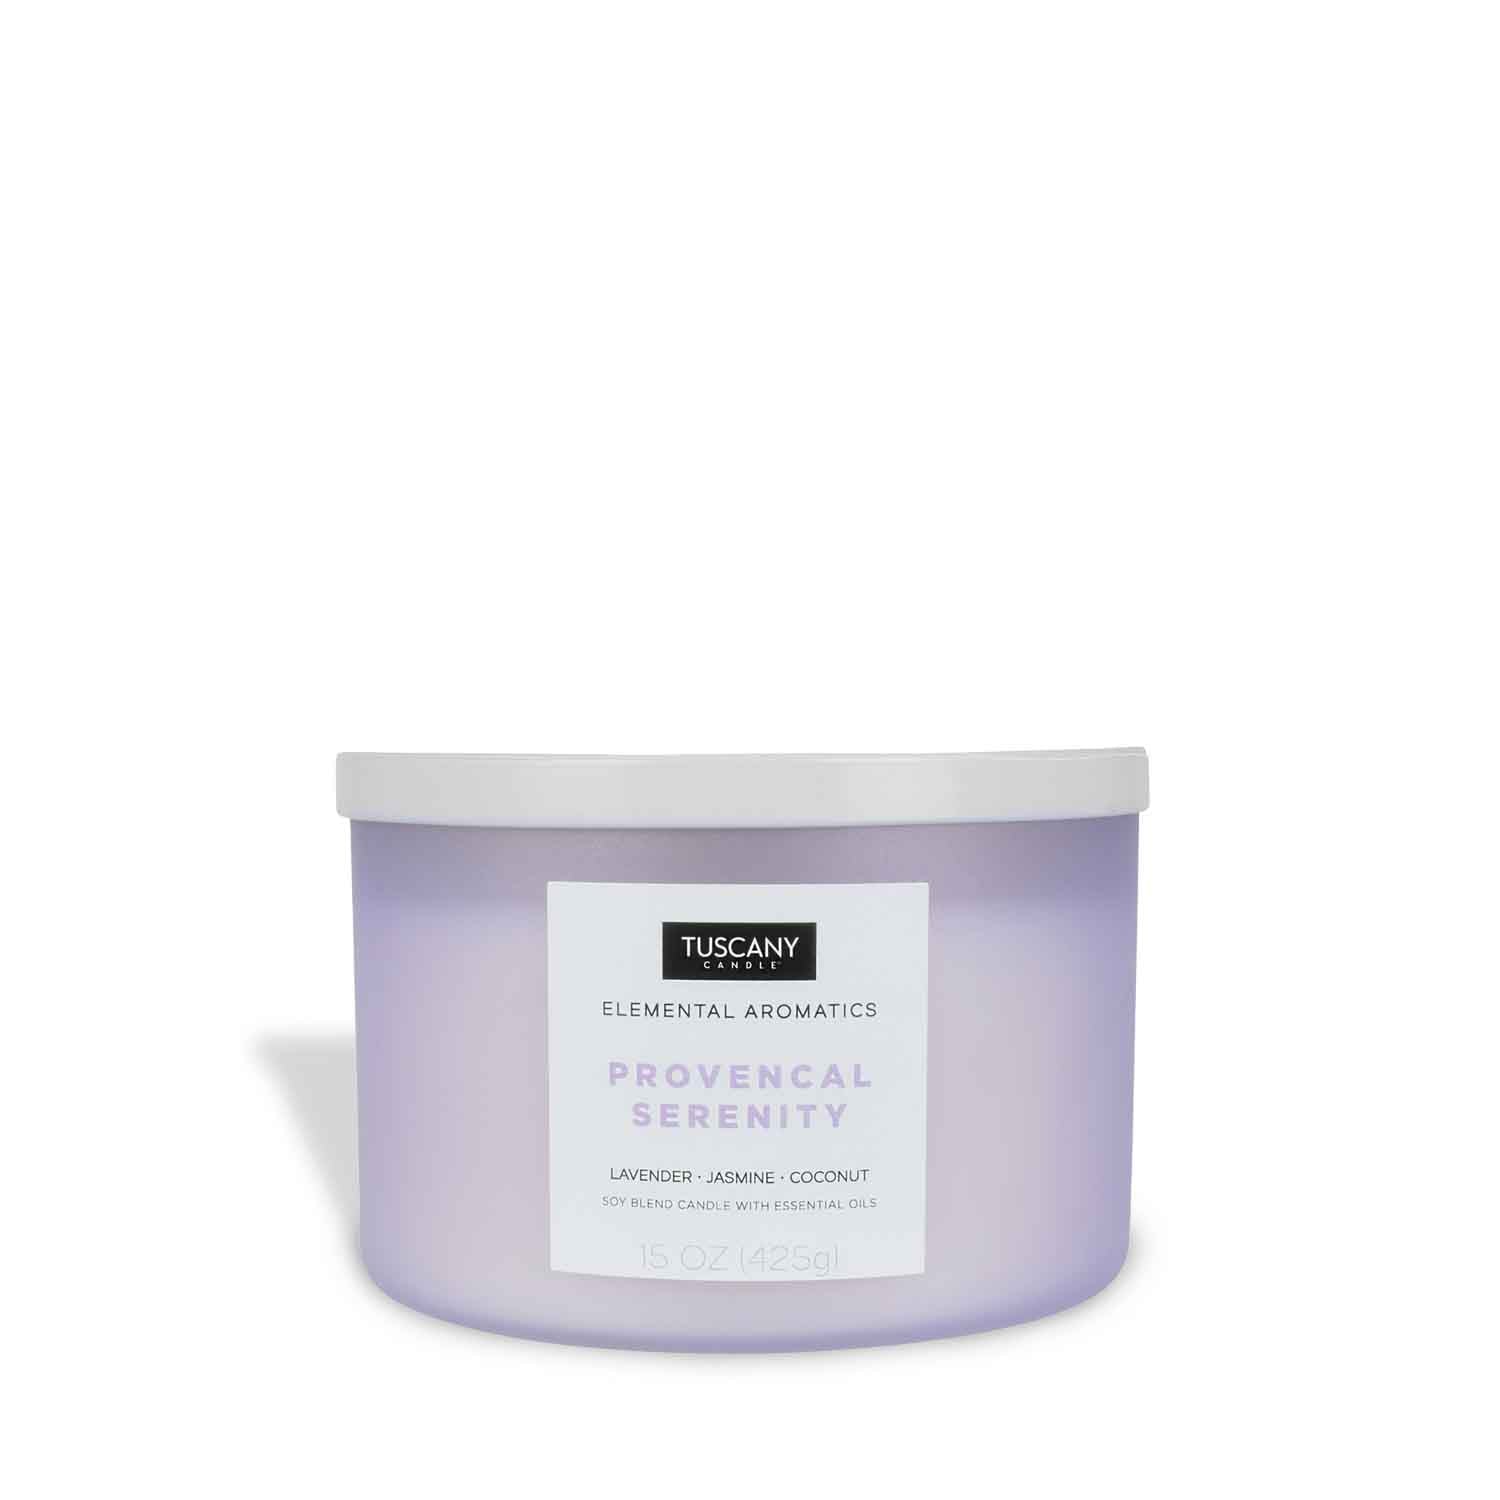 A Provencal Serenity Scented Jar Candle (15 oz) from the Elemental Aromatics Collection by Tuscany Candle, on a white background, promoting relaxation.